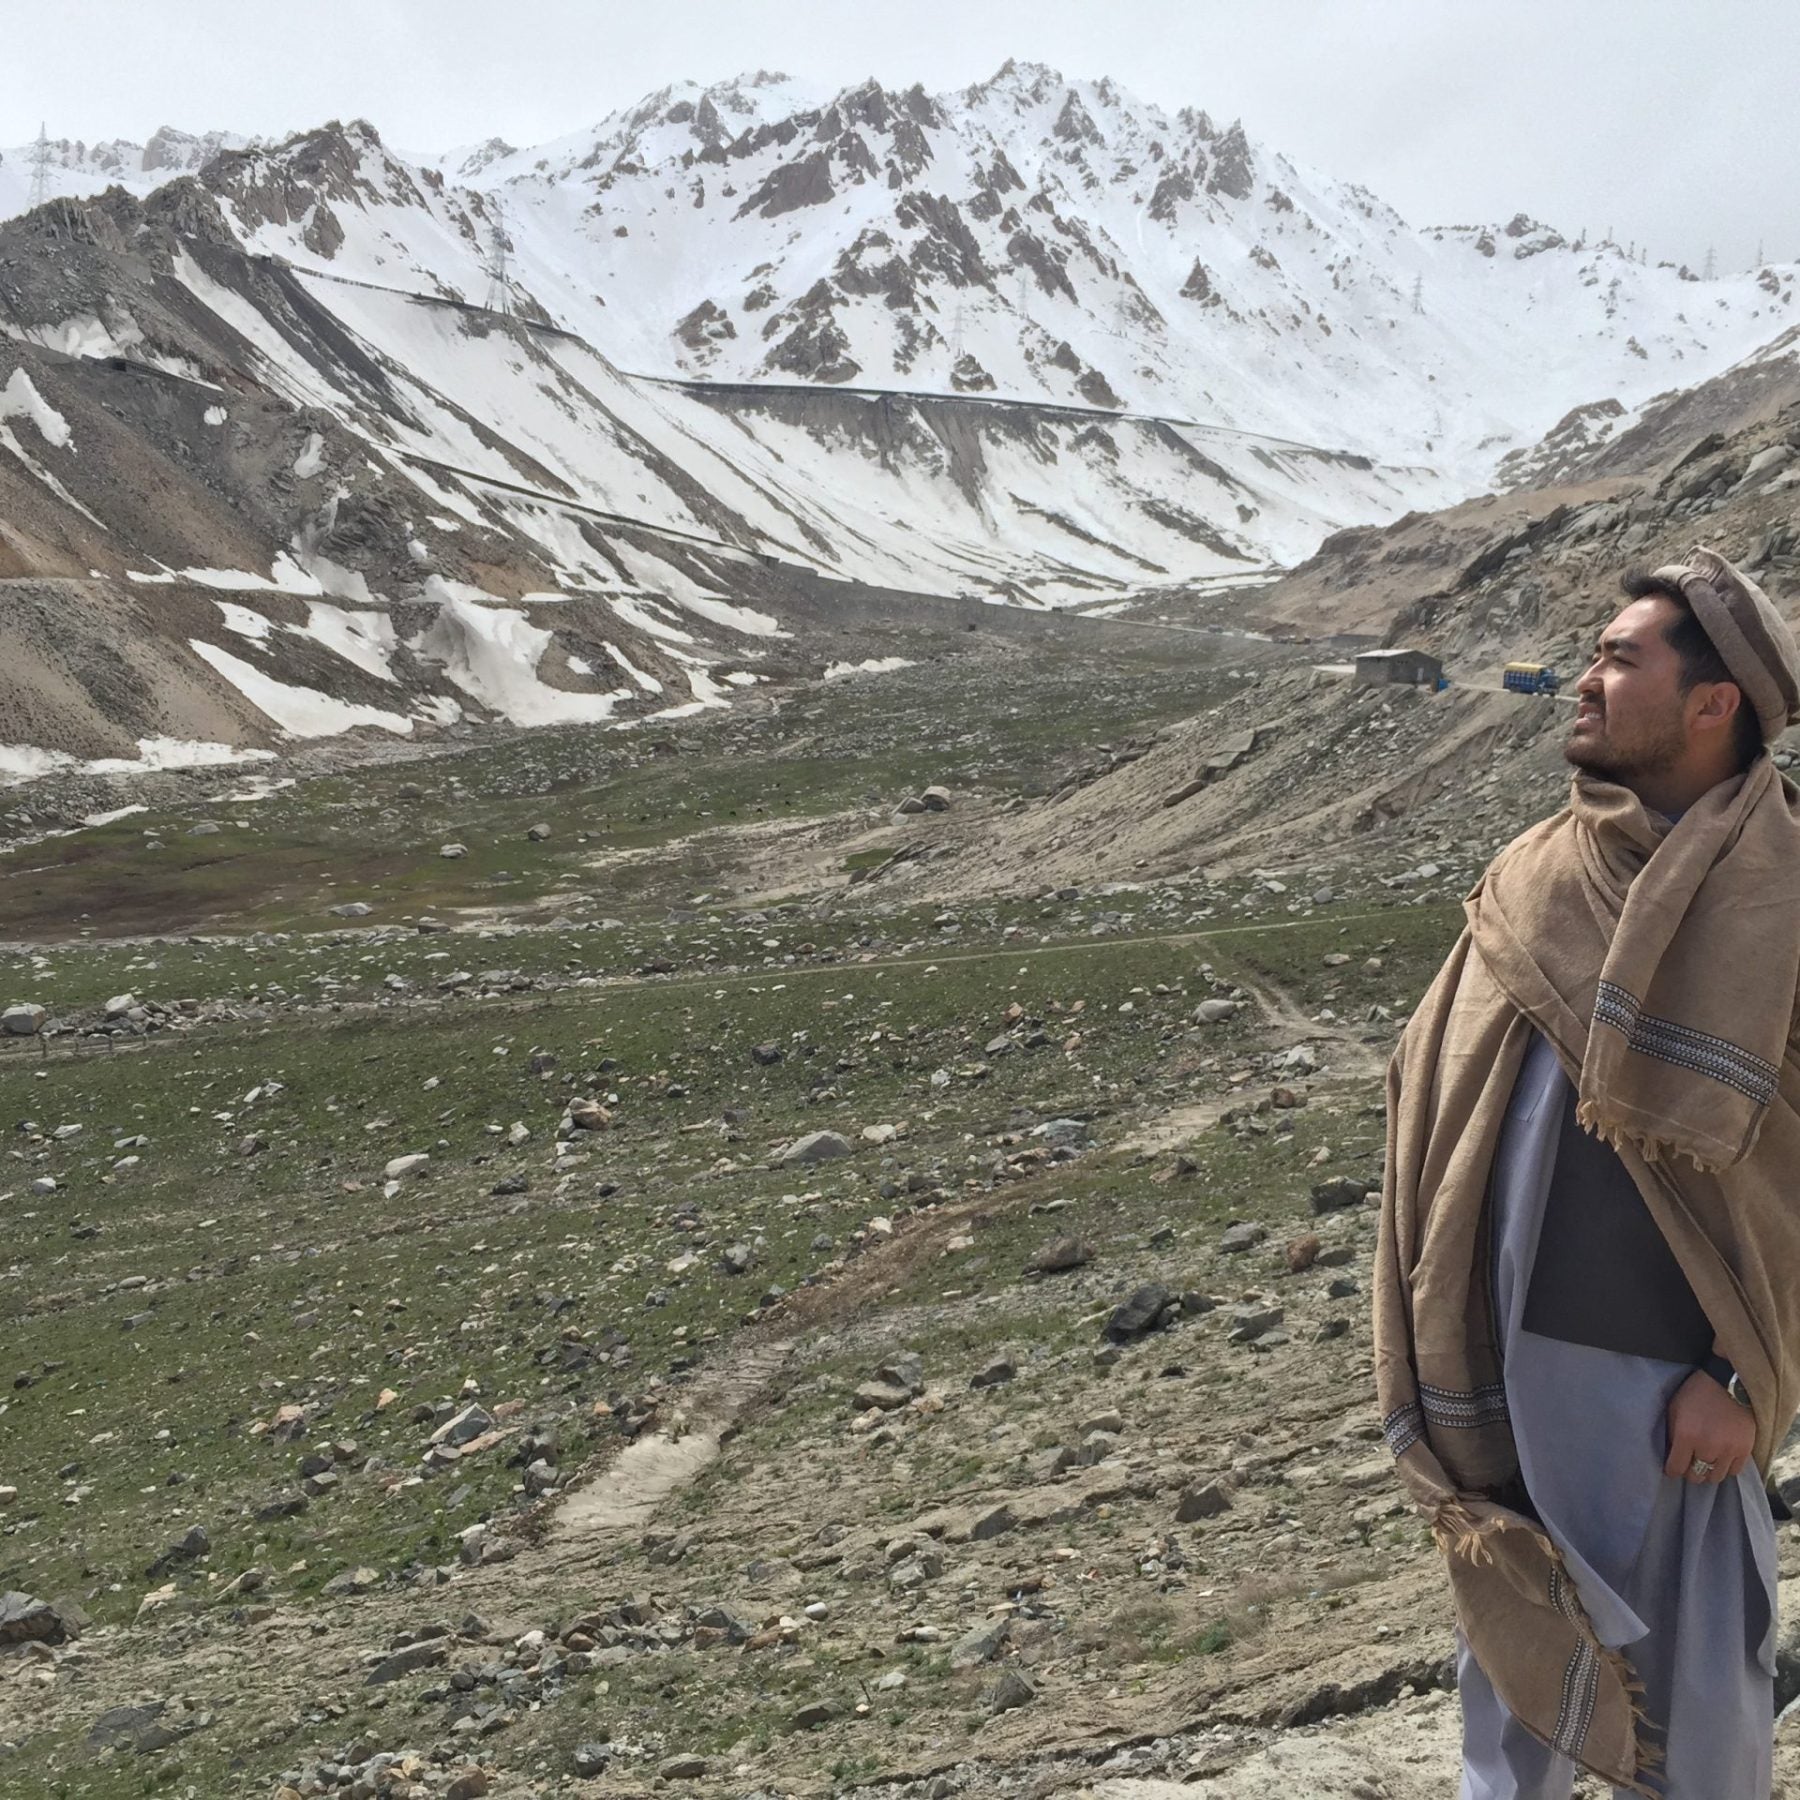 Shuja wears traditional Afghan clothing with snow-capped mountains in the background